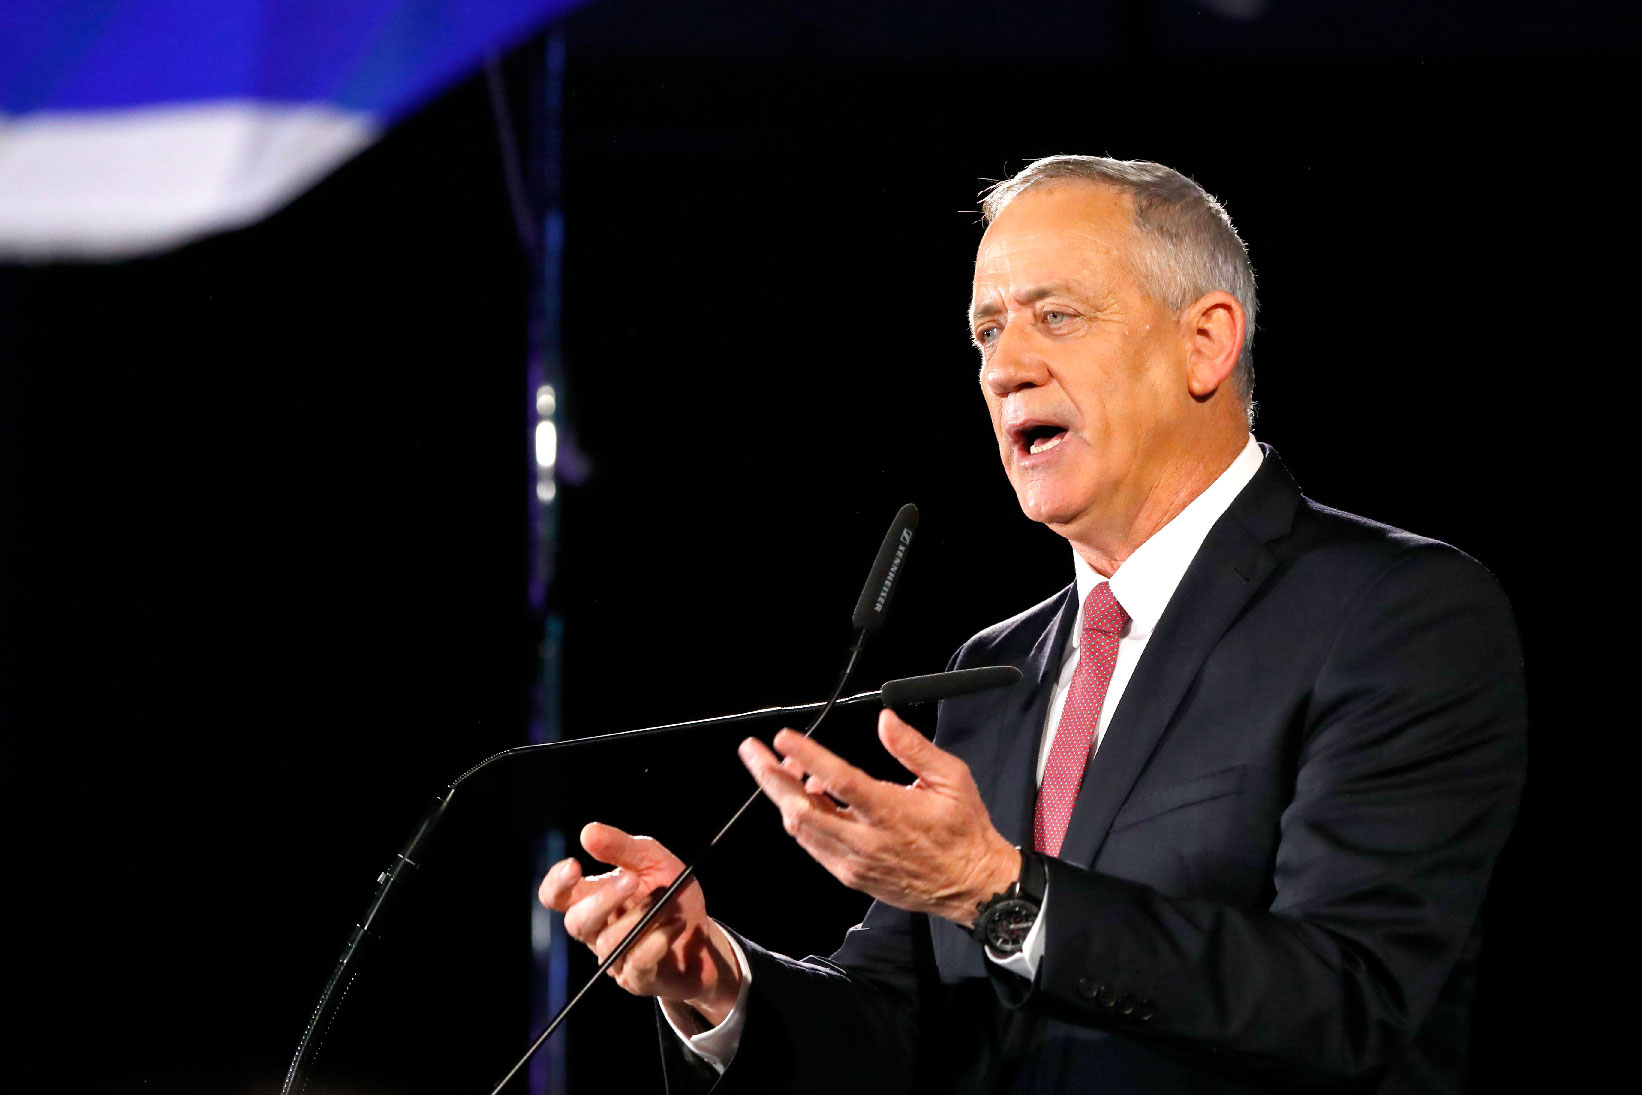 The chairman of the Israel Resilience party Benny Gantz speaks during an electoral campaign gathering on February 19, 2019, in the Israeli coastal city of Tel Aviv ahead of the April 9 general election.